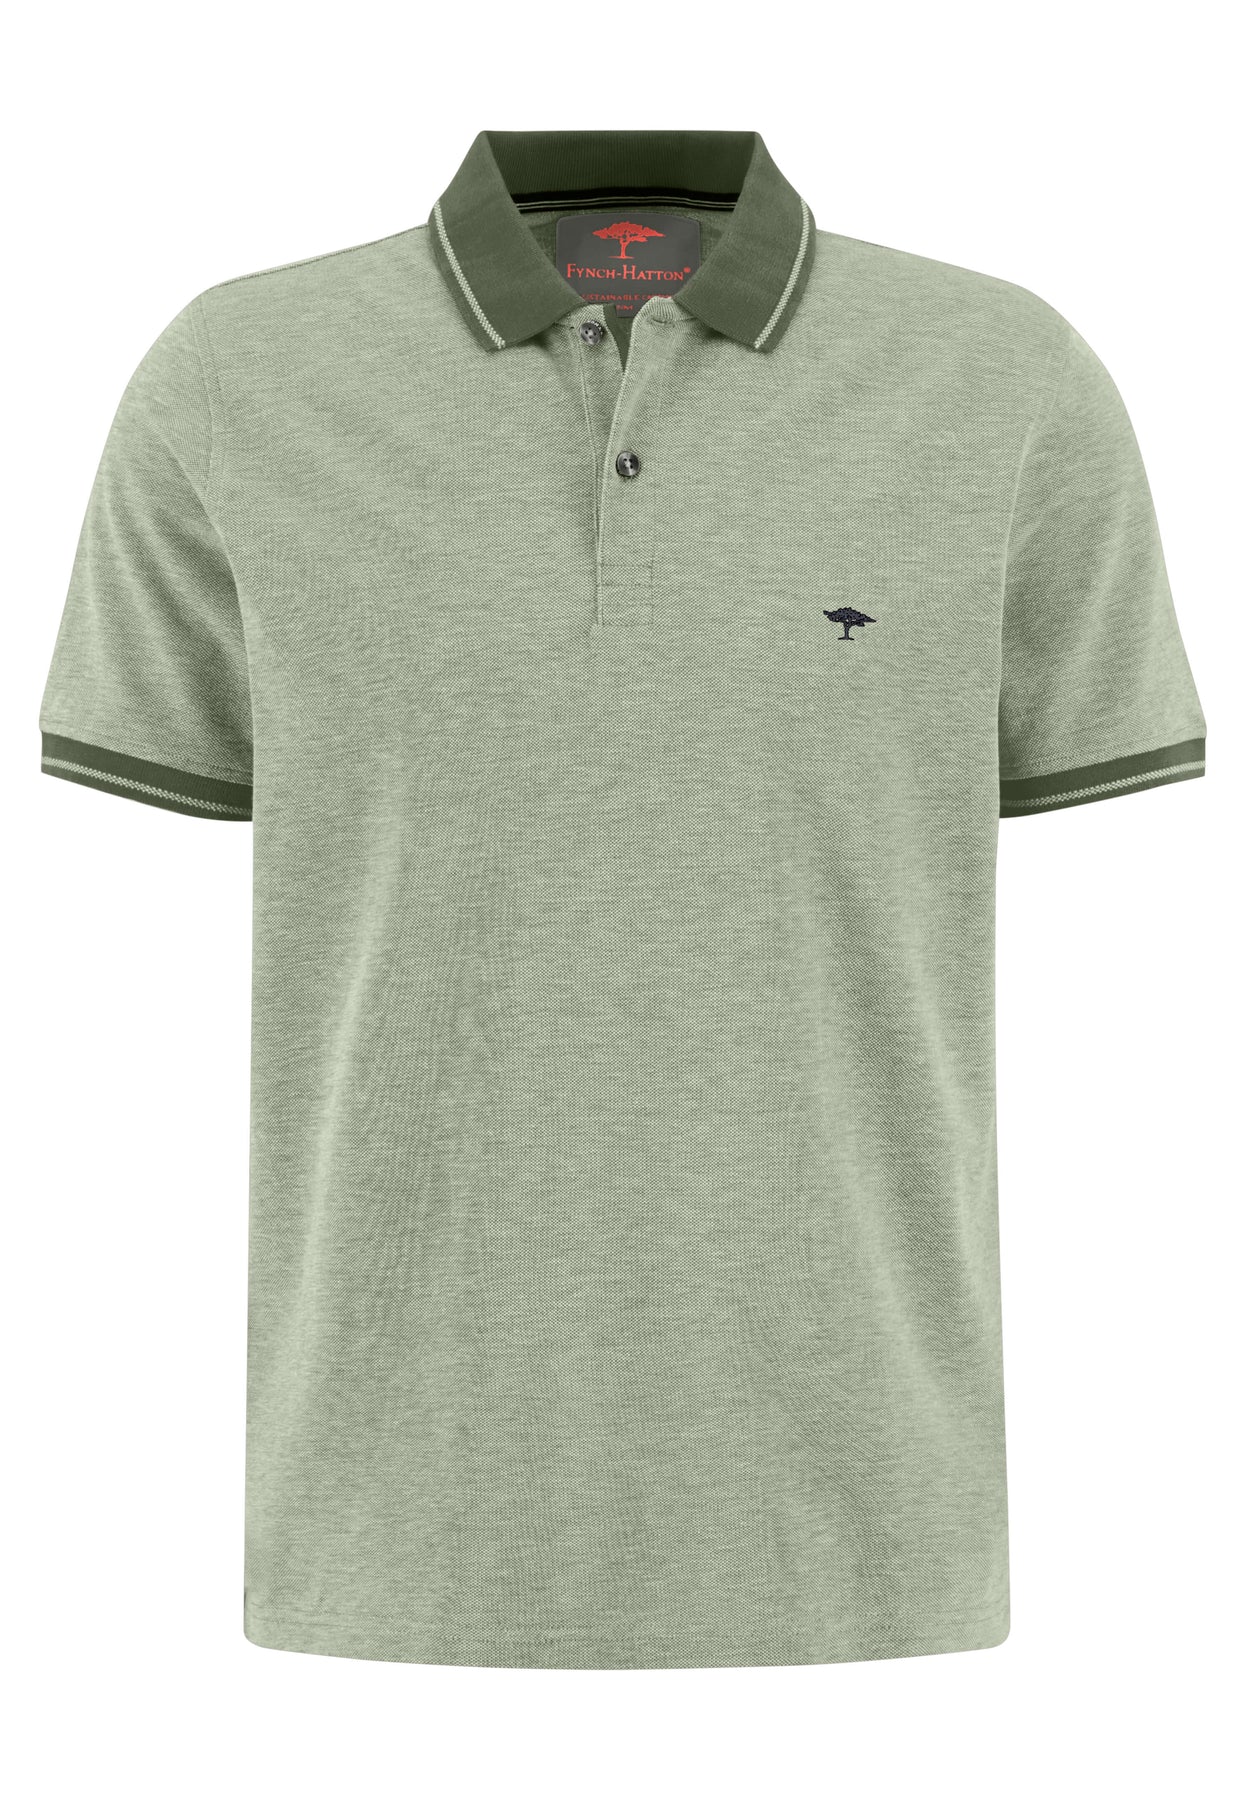 Fynch Hatton Two Tone Olive Polo